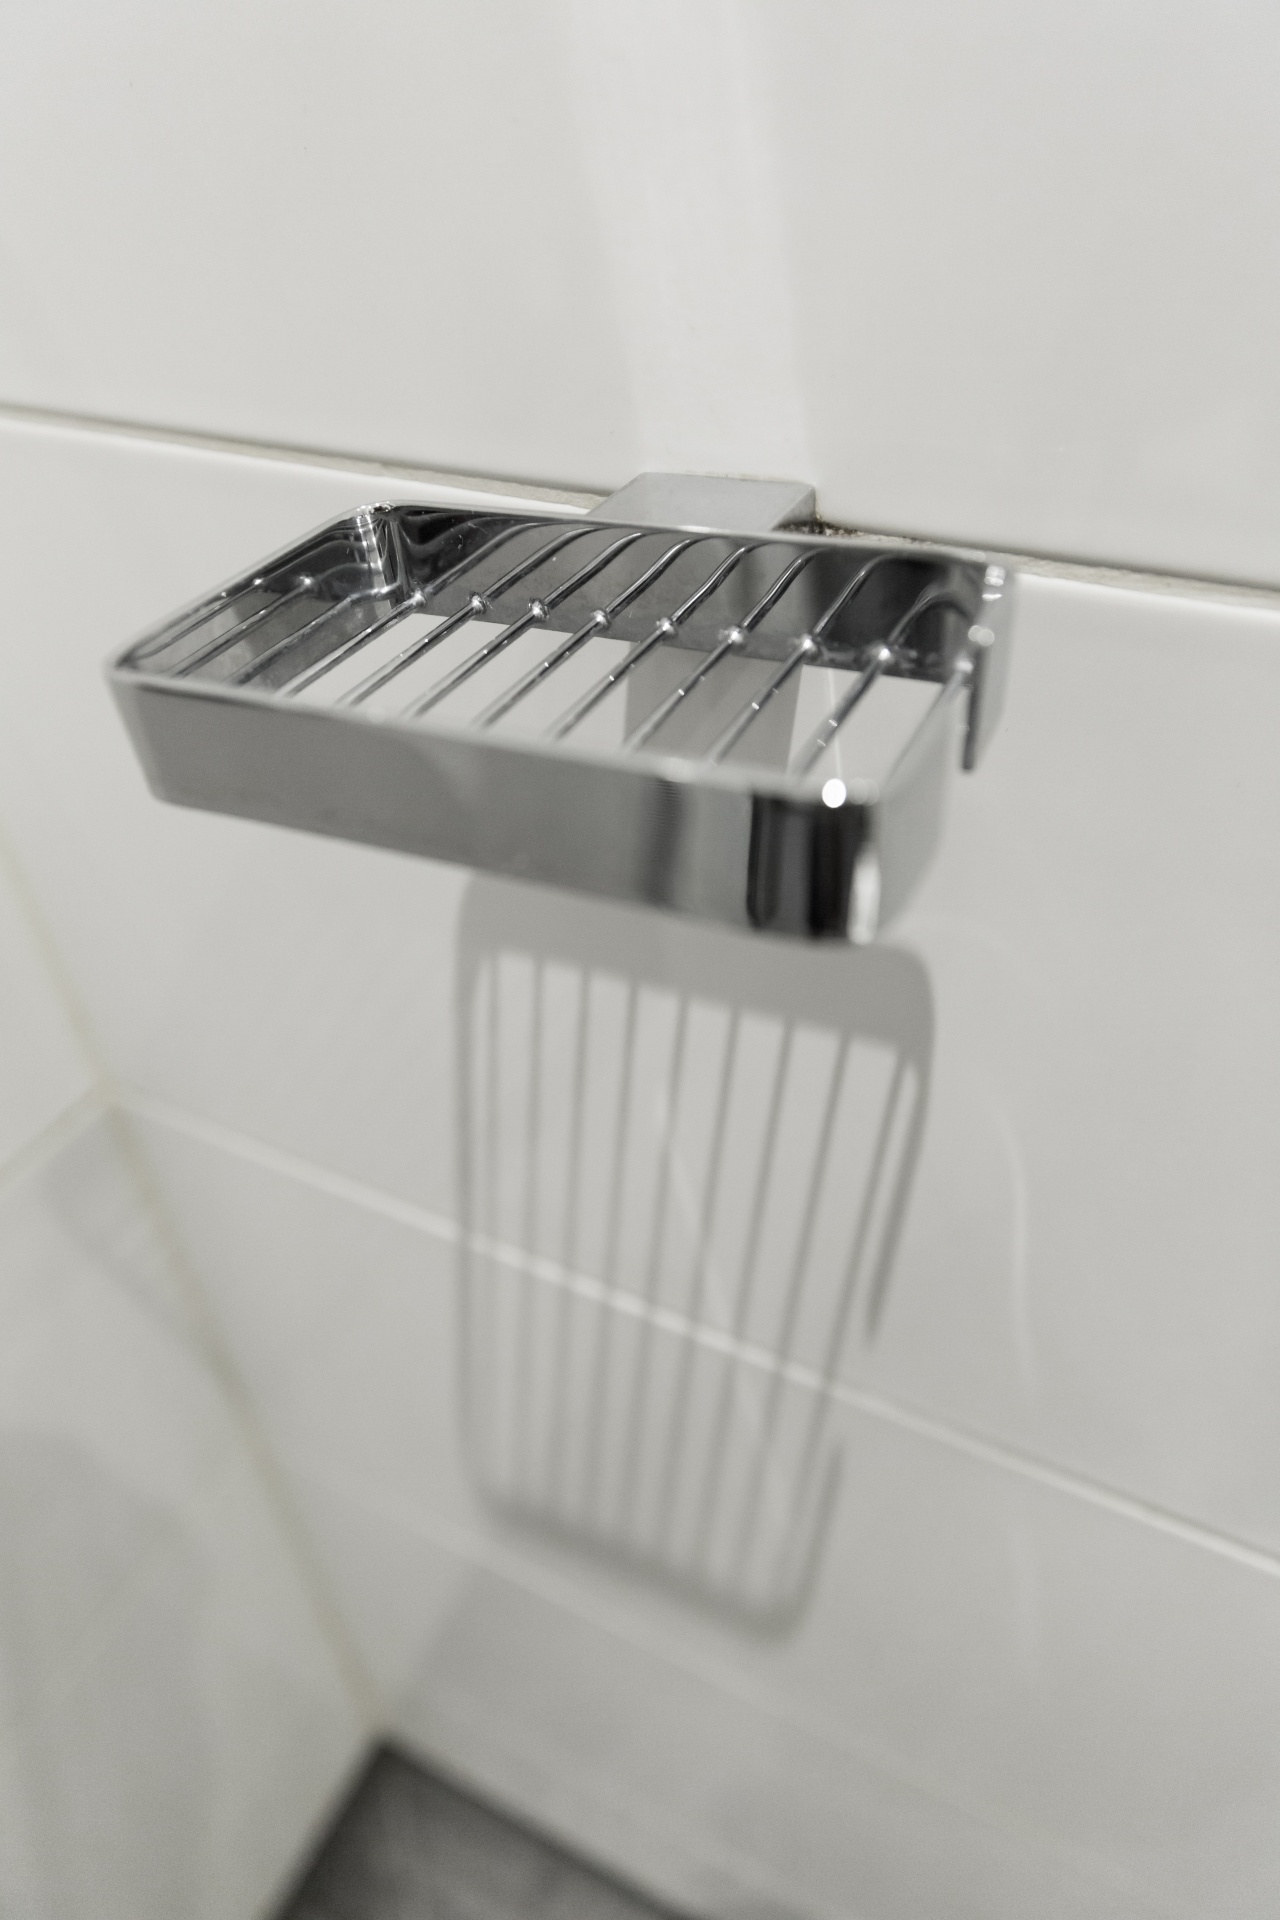 Stainless steel soap holder in a bathroom